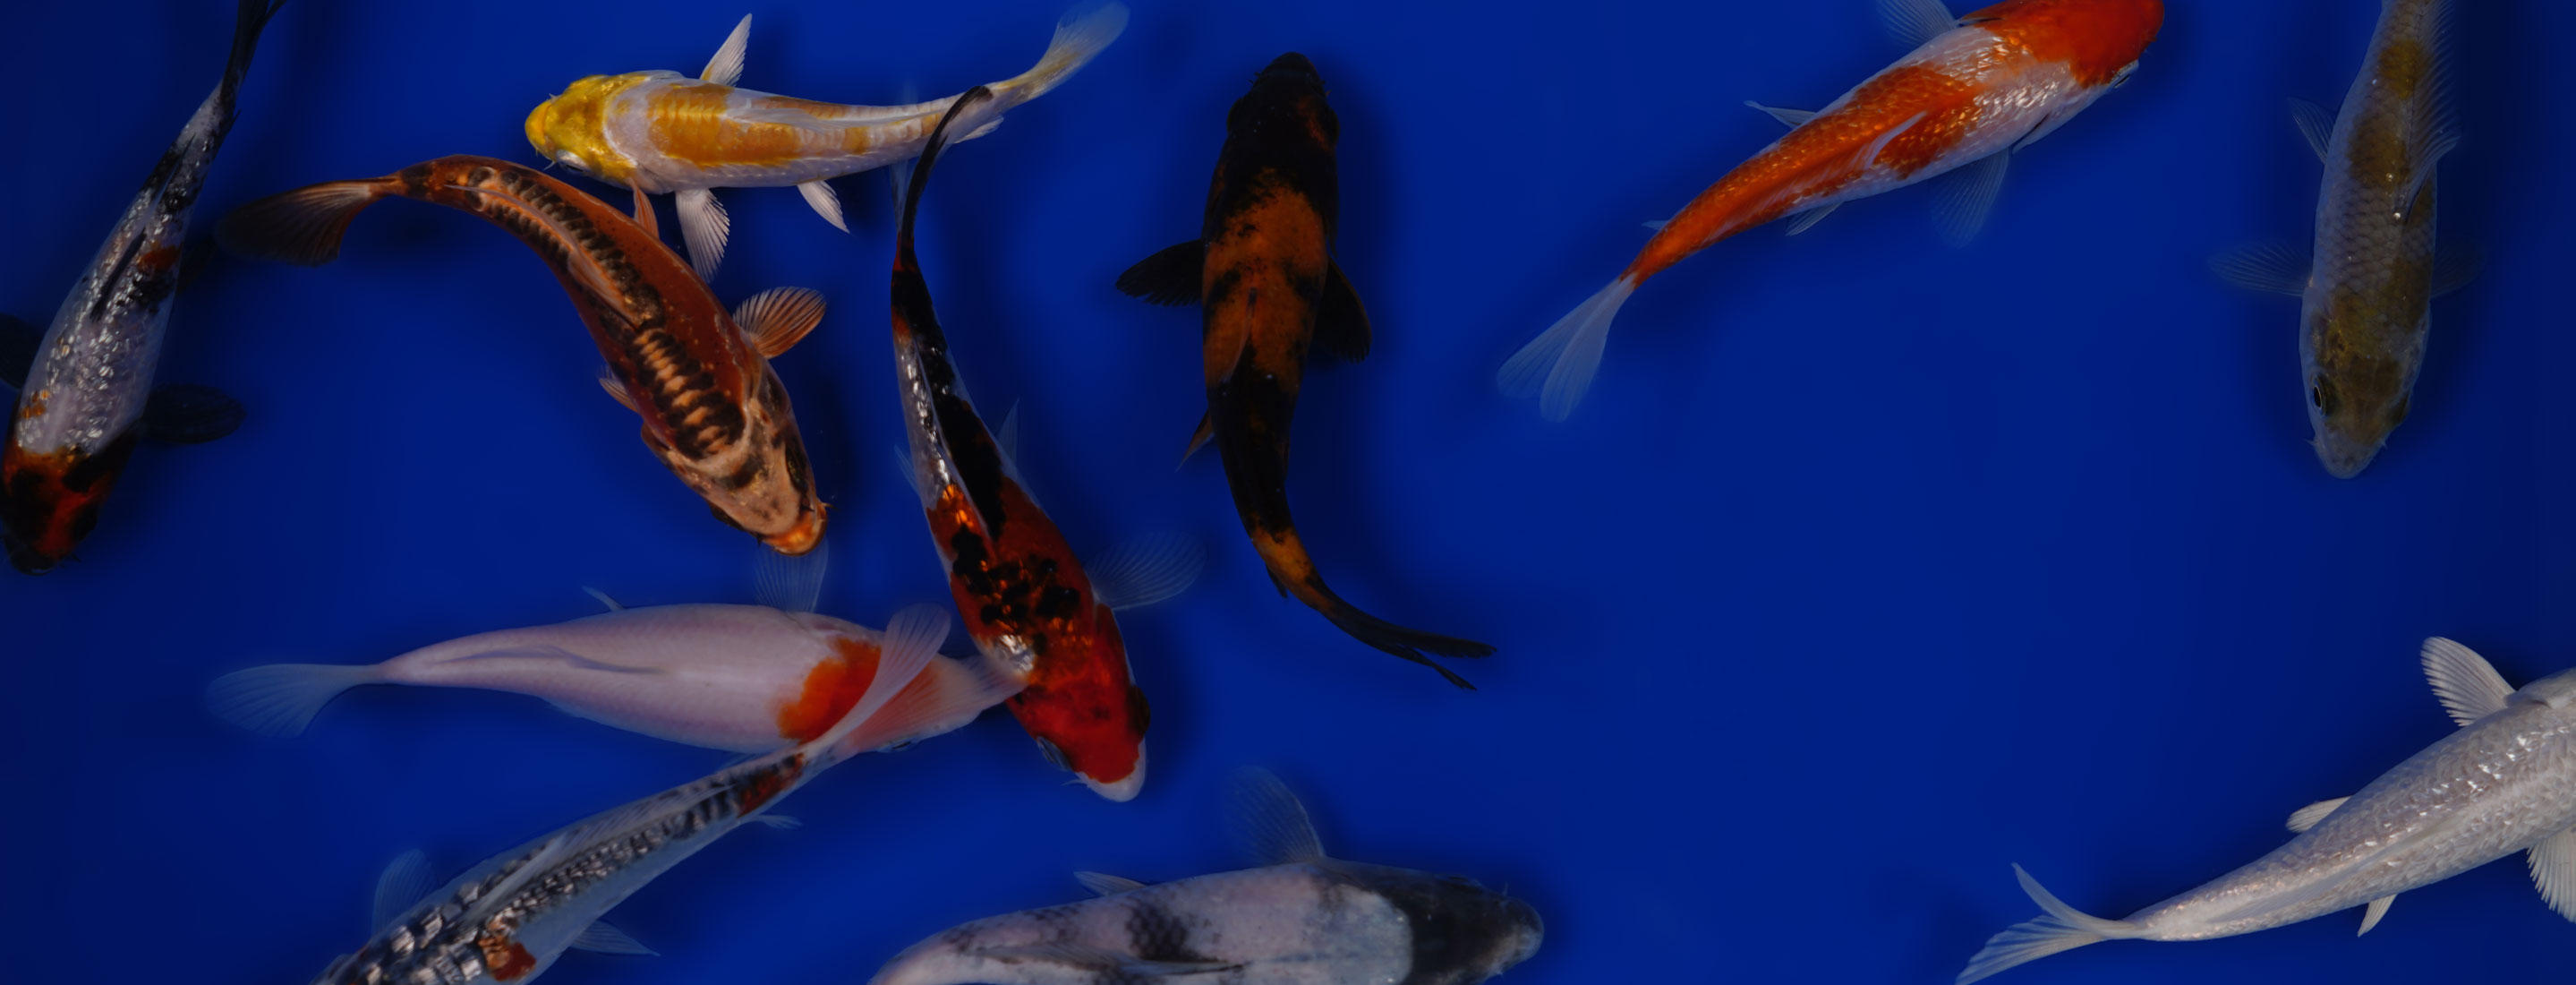 How a Koi Seller Sources the High-Quality Fish That Can Sell for Thousands